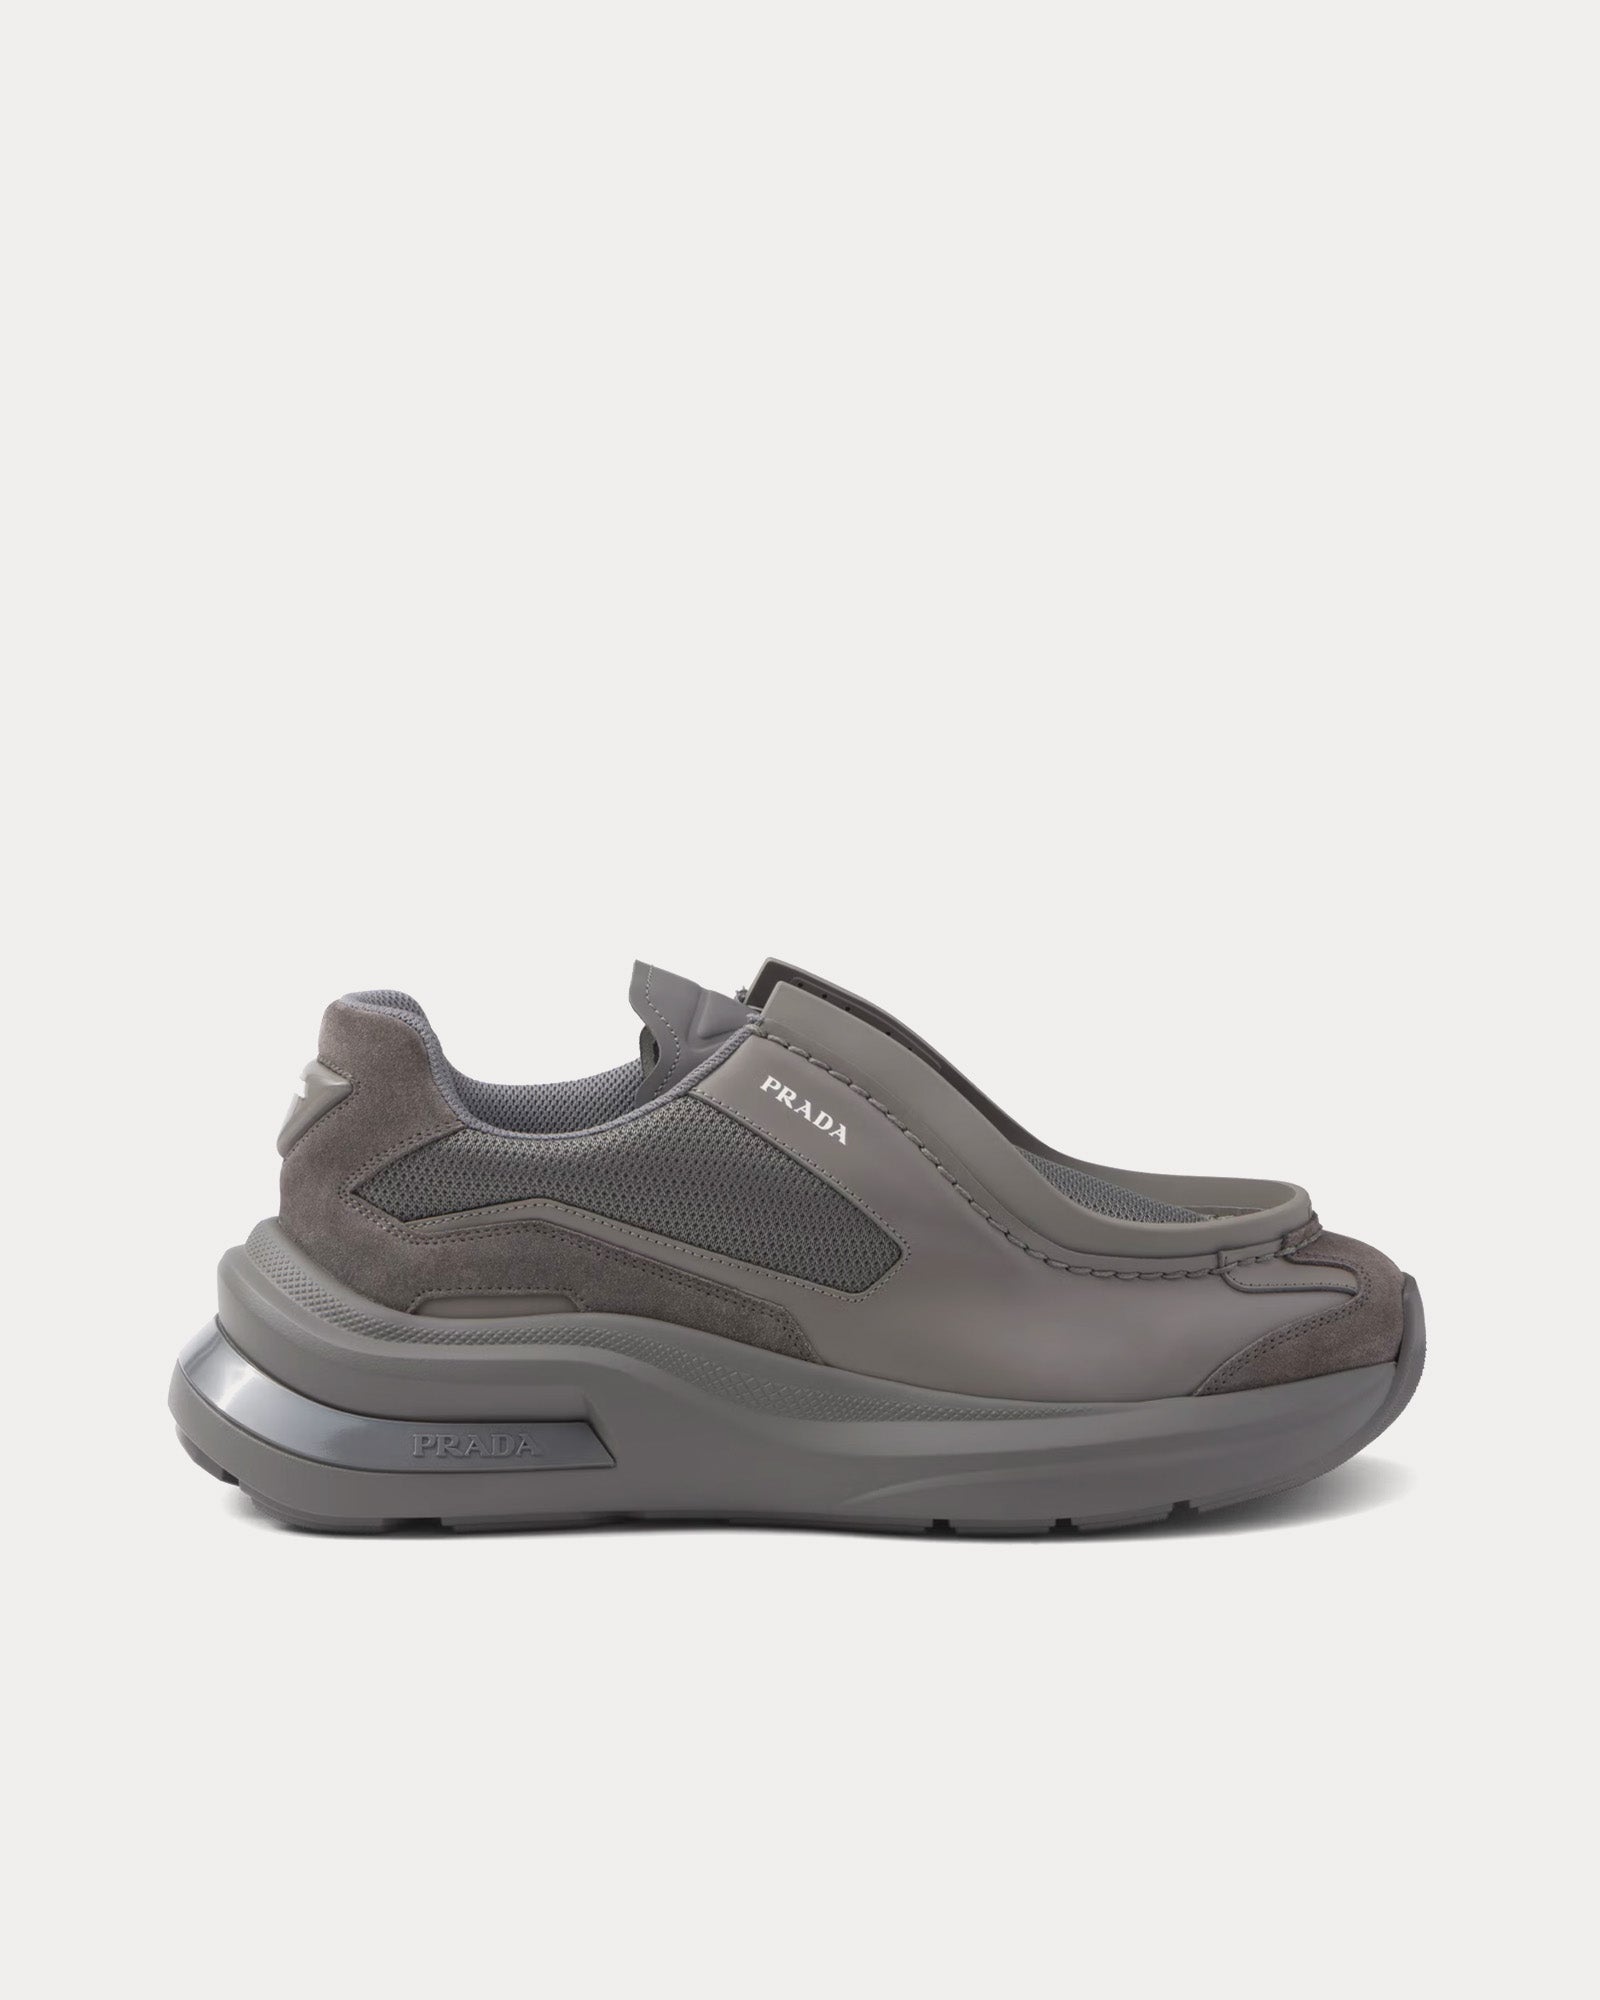 Prada - Systeme Brushed Leather with Bike Fabric & Suede Elements Marble Grey Low Top Sneakers